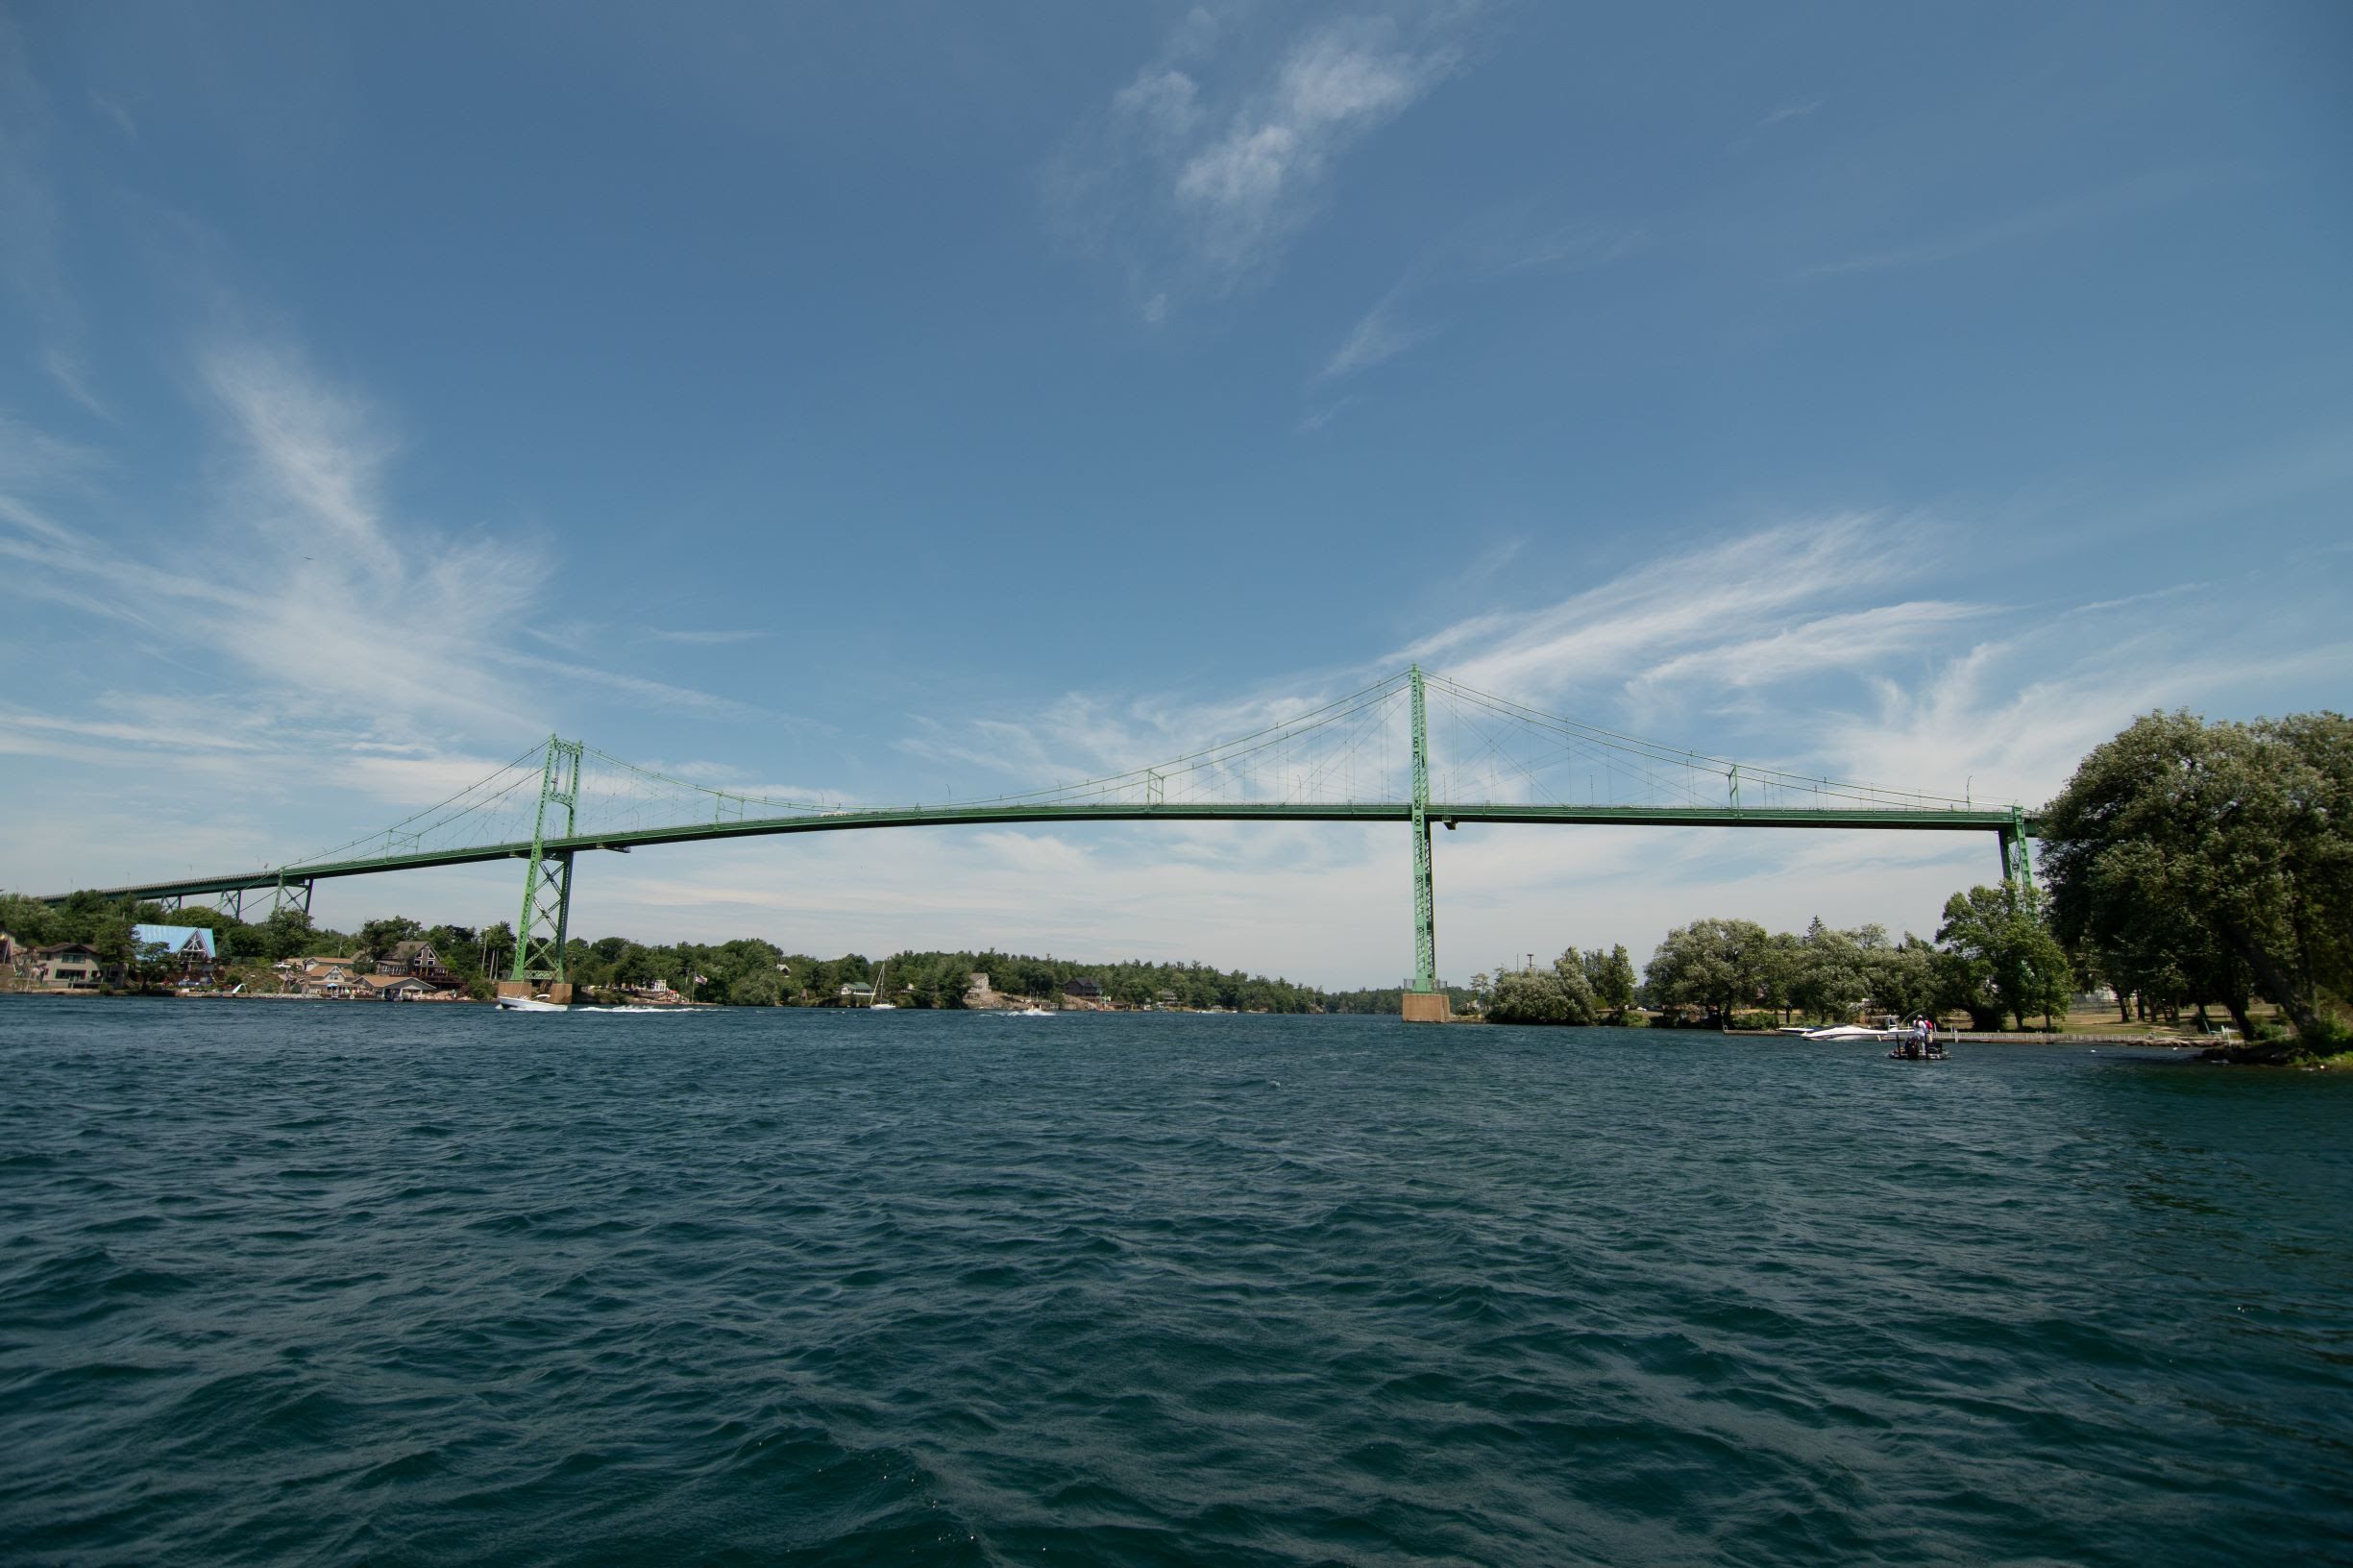 Critical Decisions Likely To Impact Bassmaster Elite Series Event On St. Lawrence River